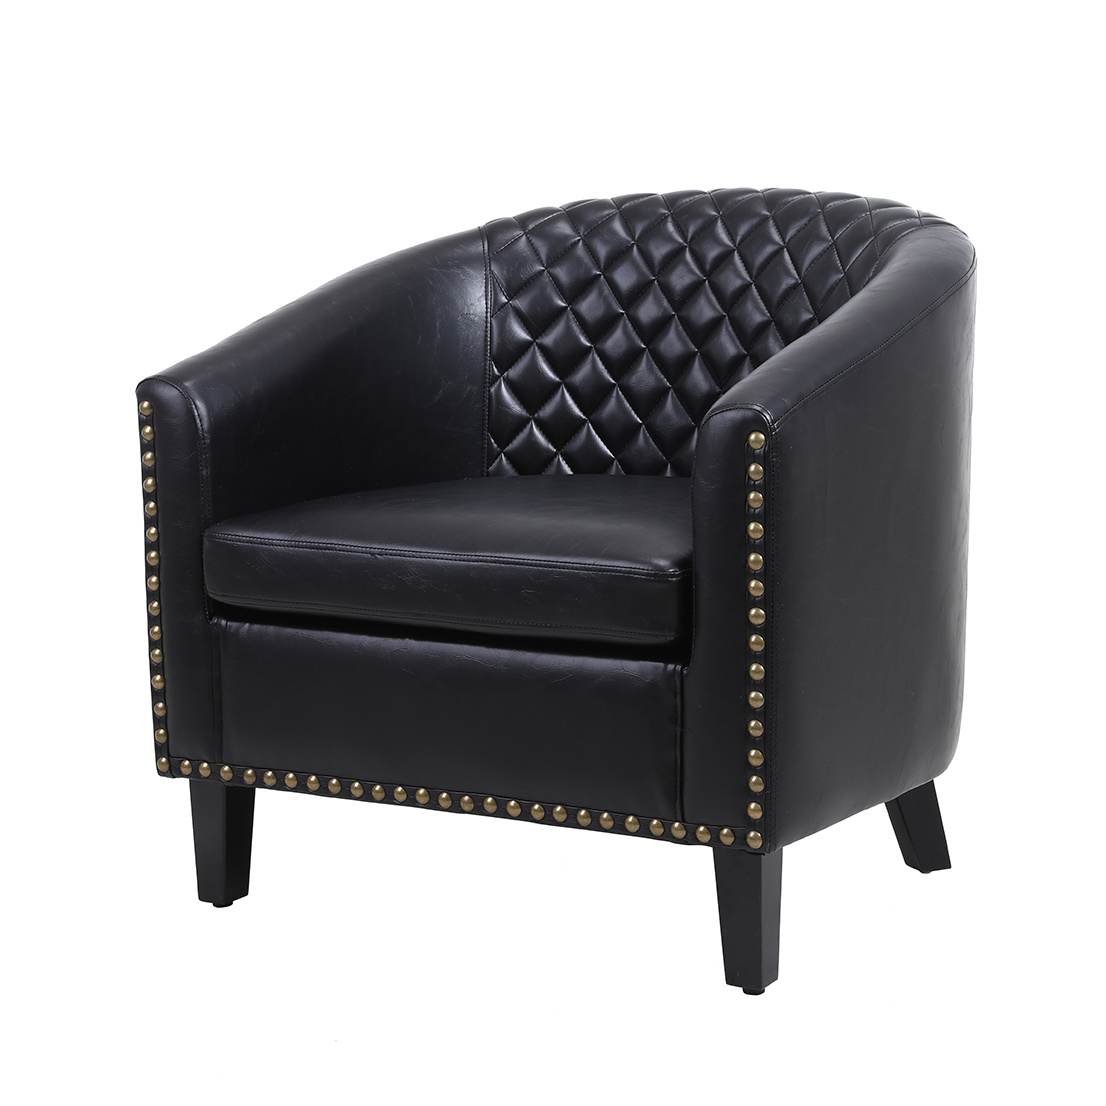 PALDIN LEATHER TUB CHAIR Black Faux Leather Armchair Club Chair Bucket Chair For Dining Living Room Office Reception 